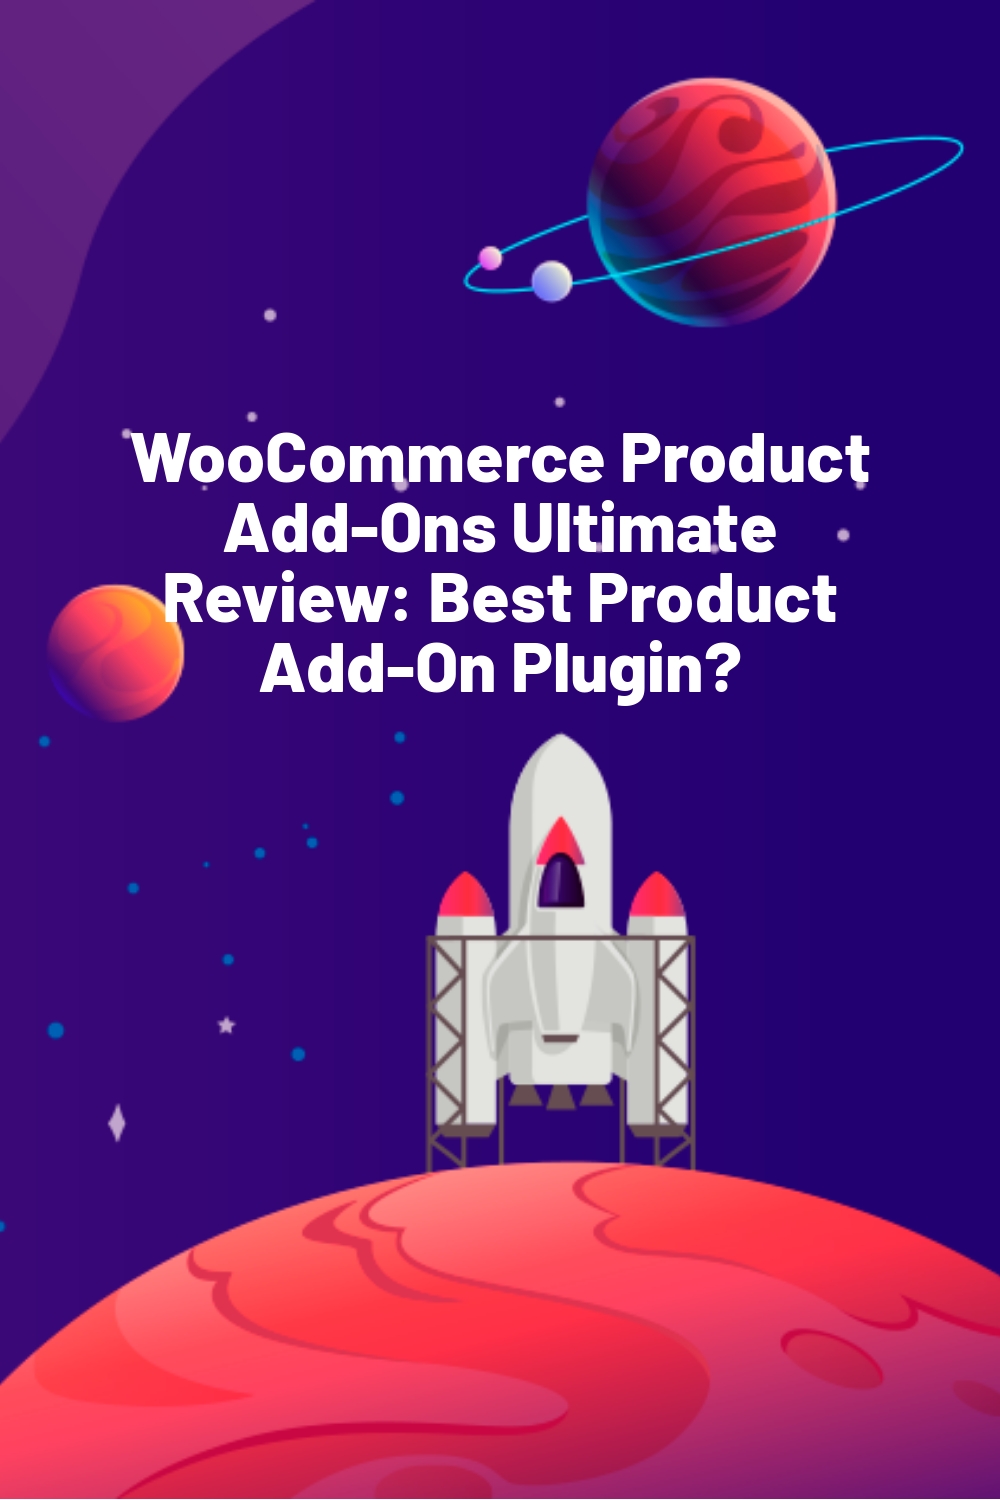 WooCommerce Product Add-Ons Ultimate Review: Best Product Add-On Plugin?